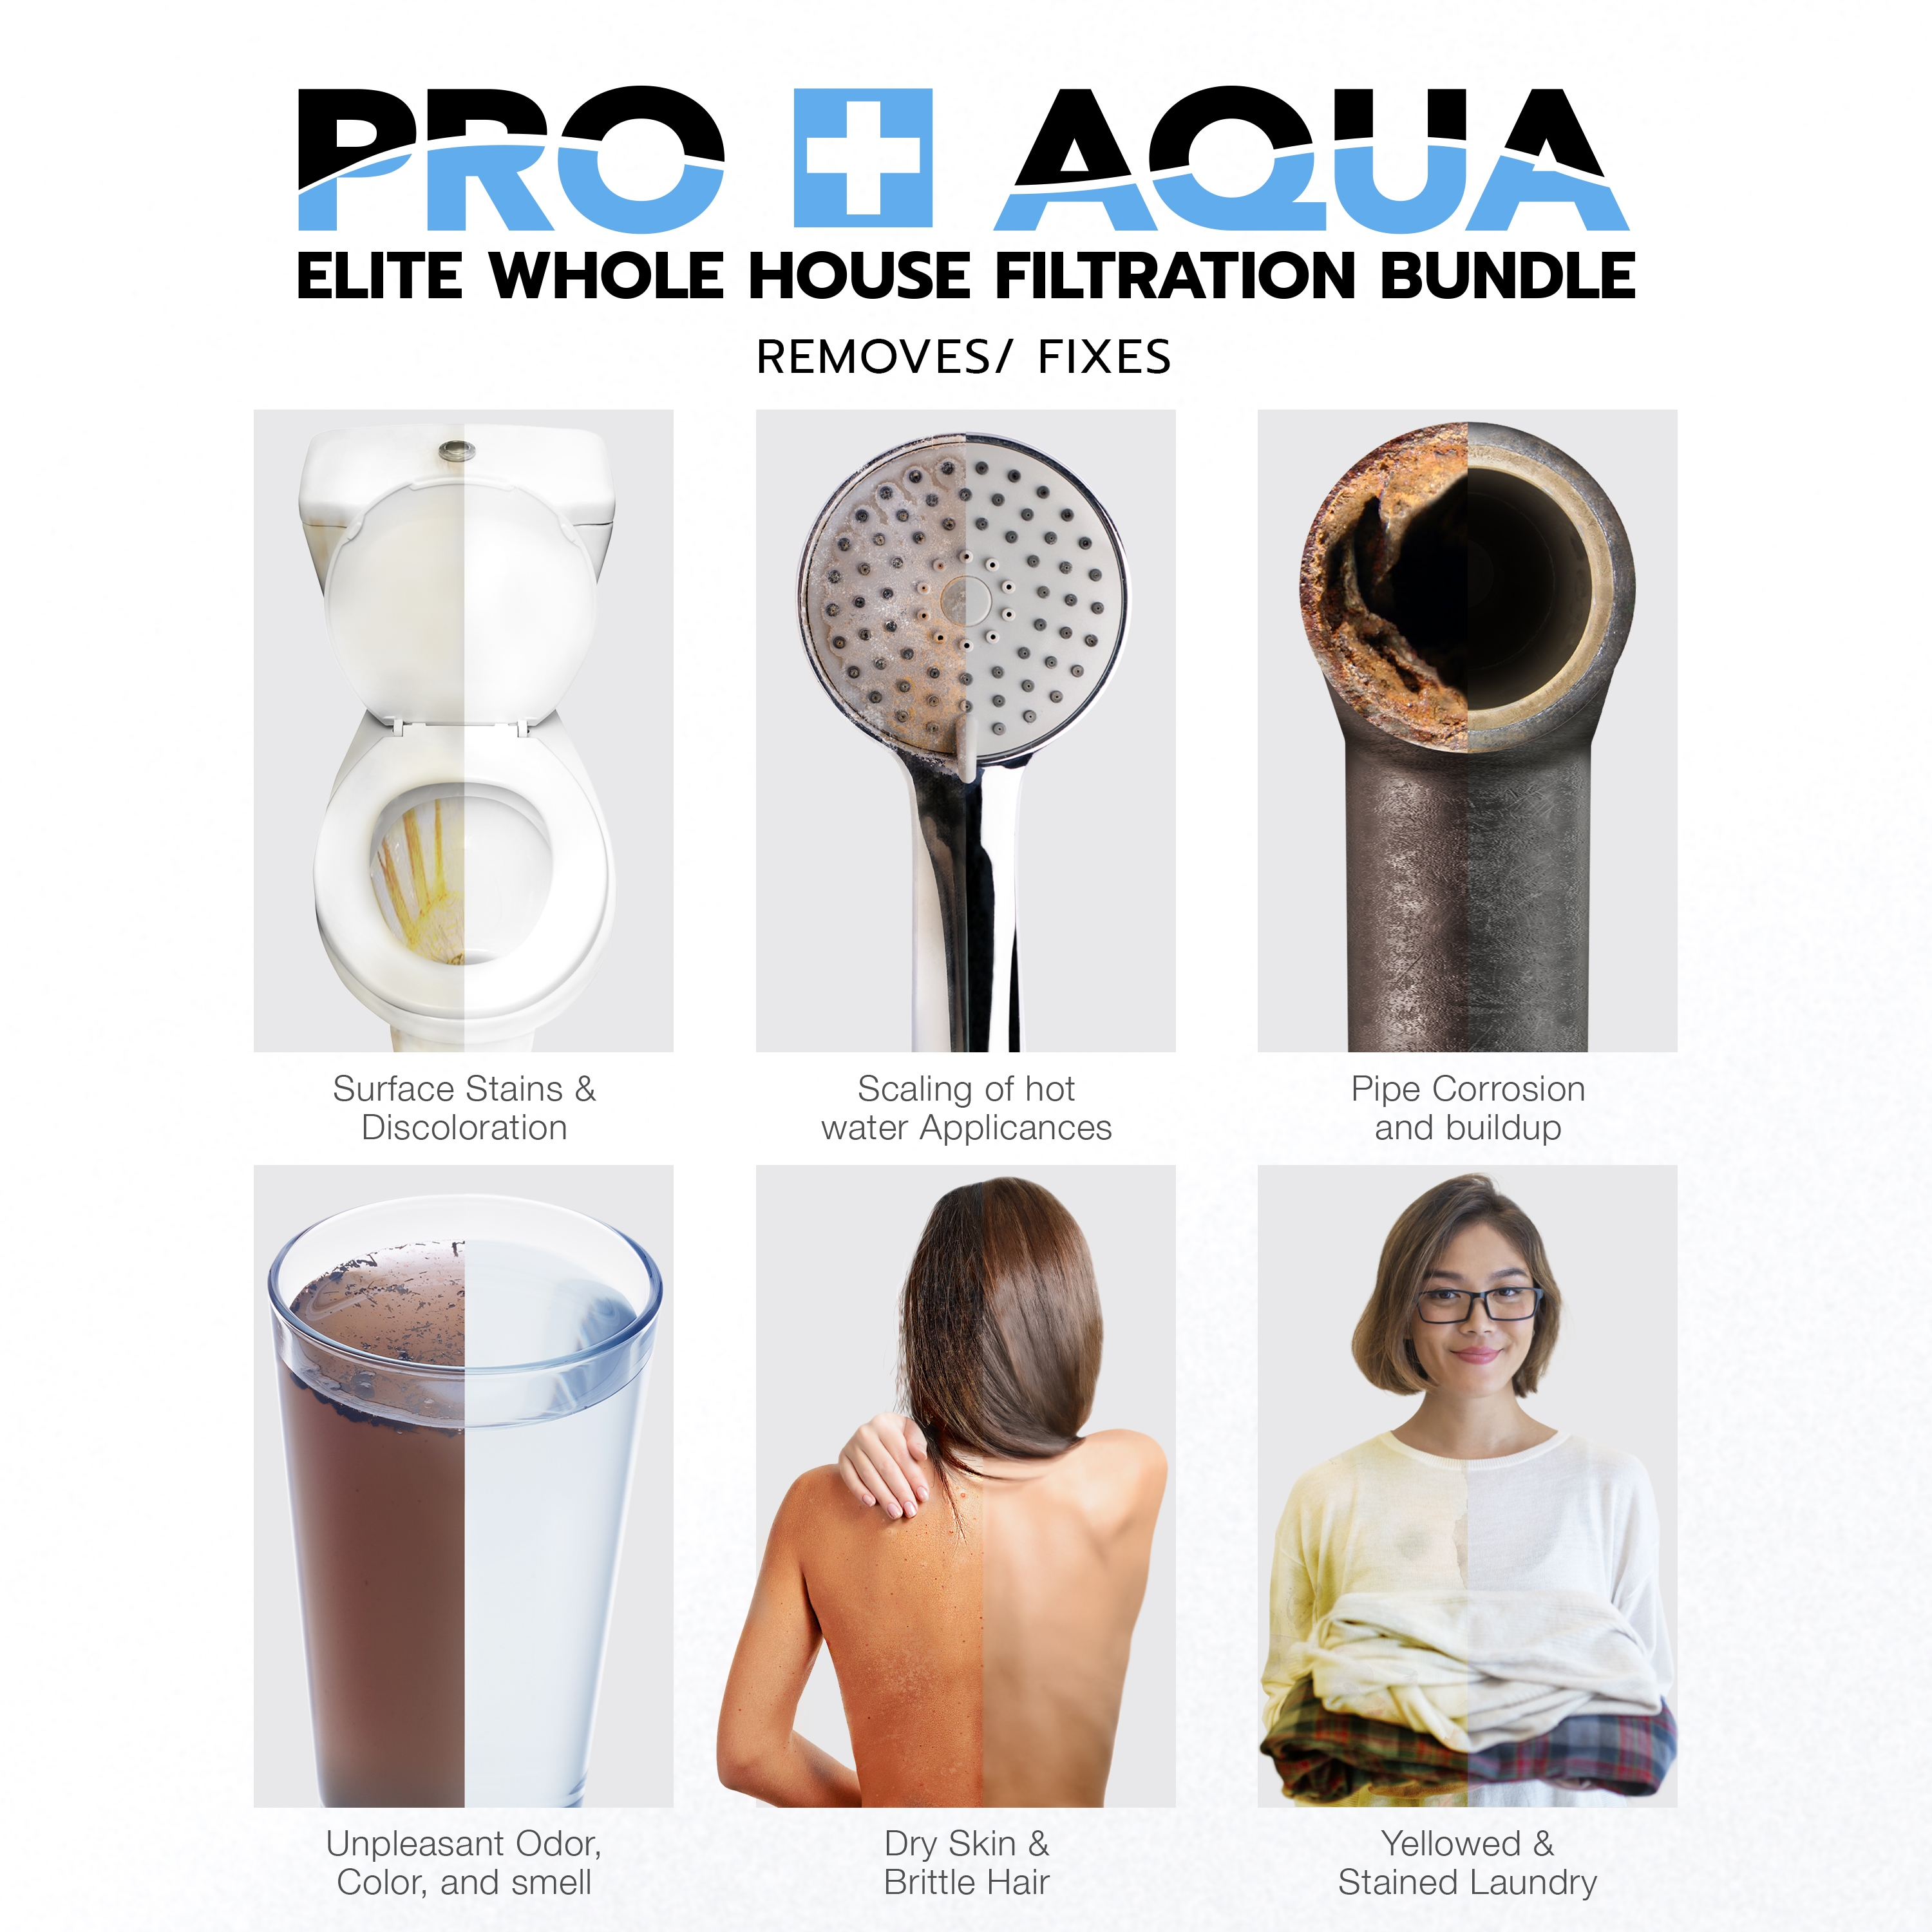 PRO+AQUA ELITE Whole House Well Water Filter System and Water Softener Bundle - Remove Iron, Sulfur, Sediment, and more